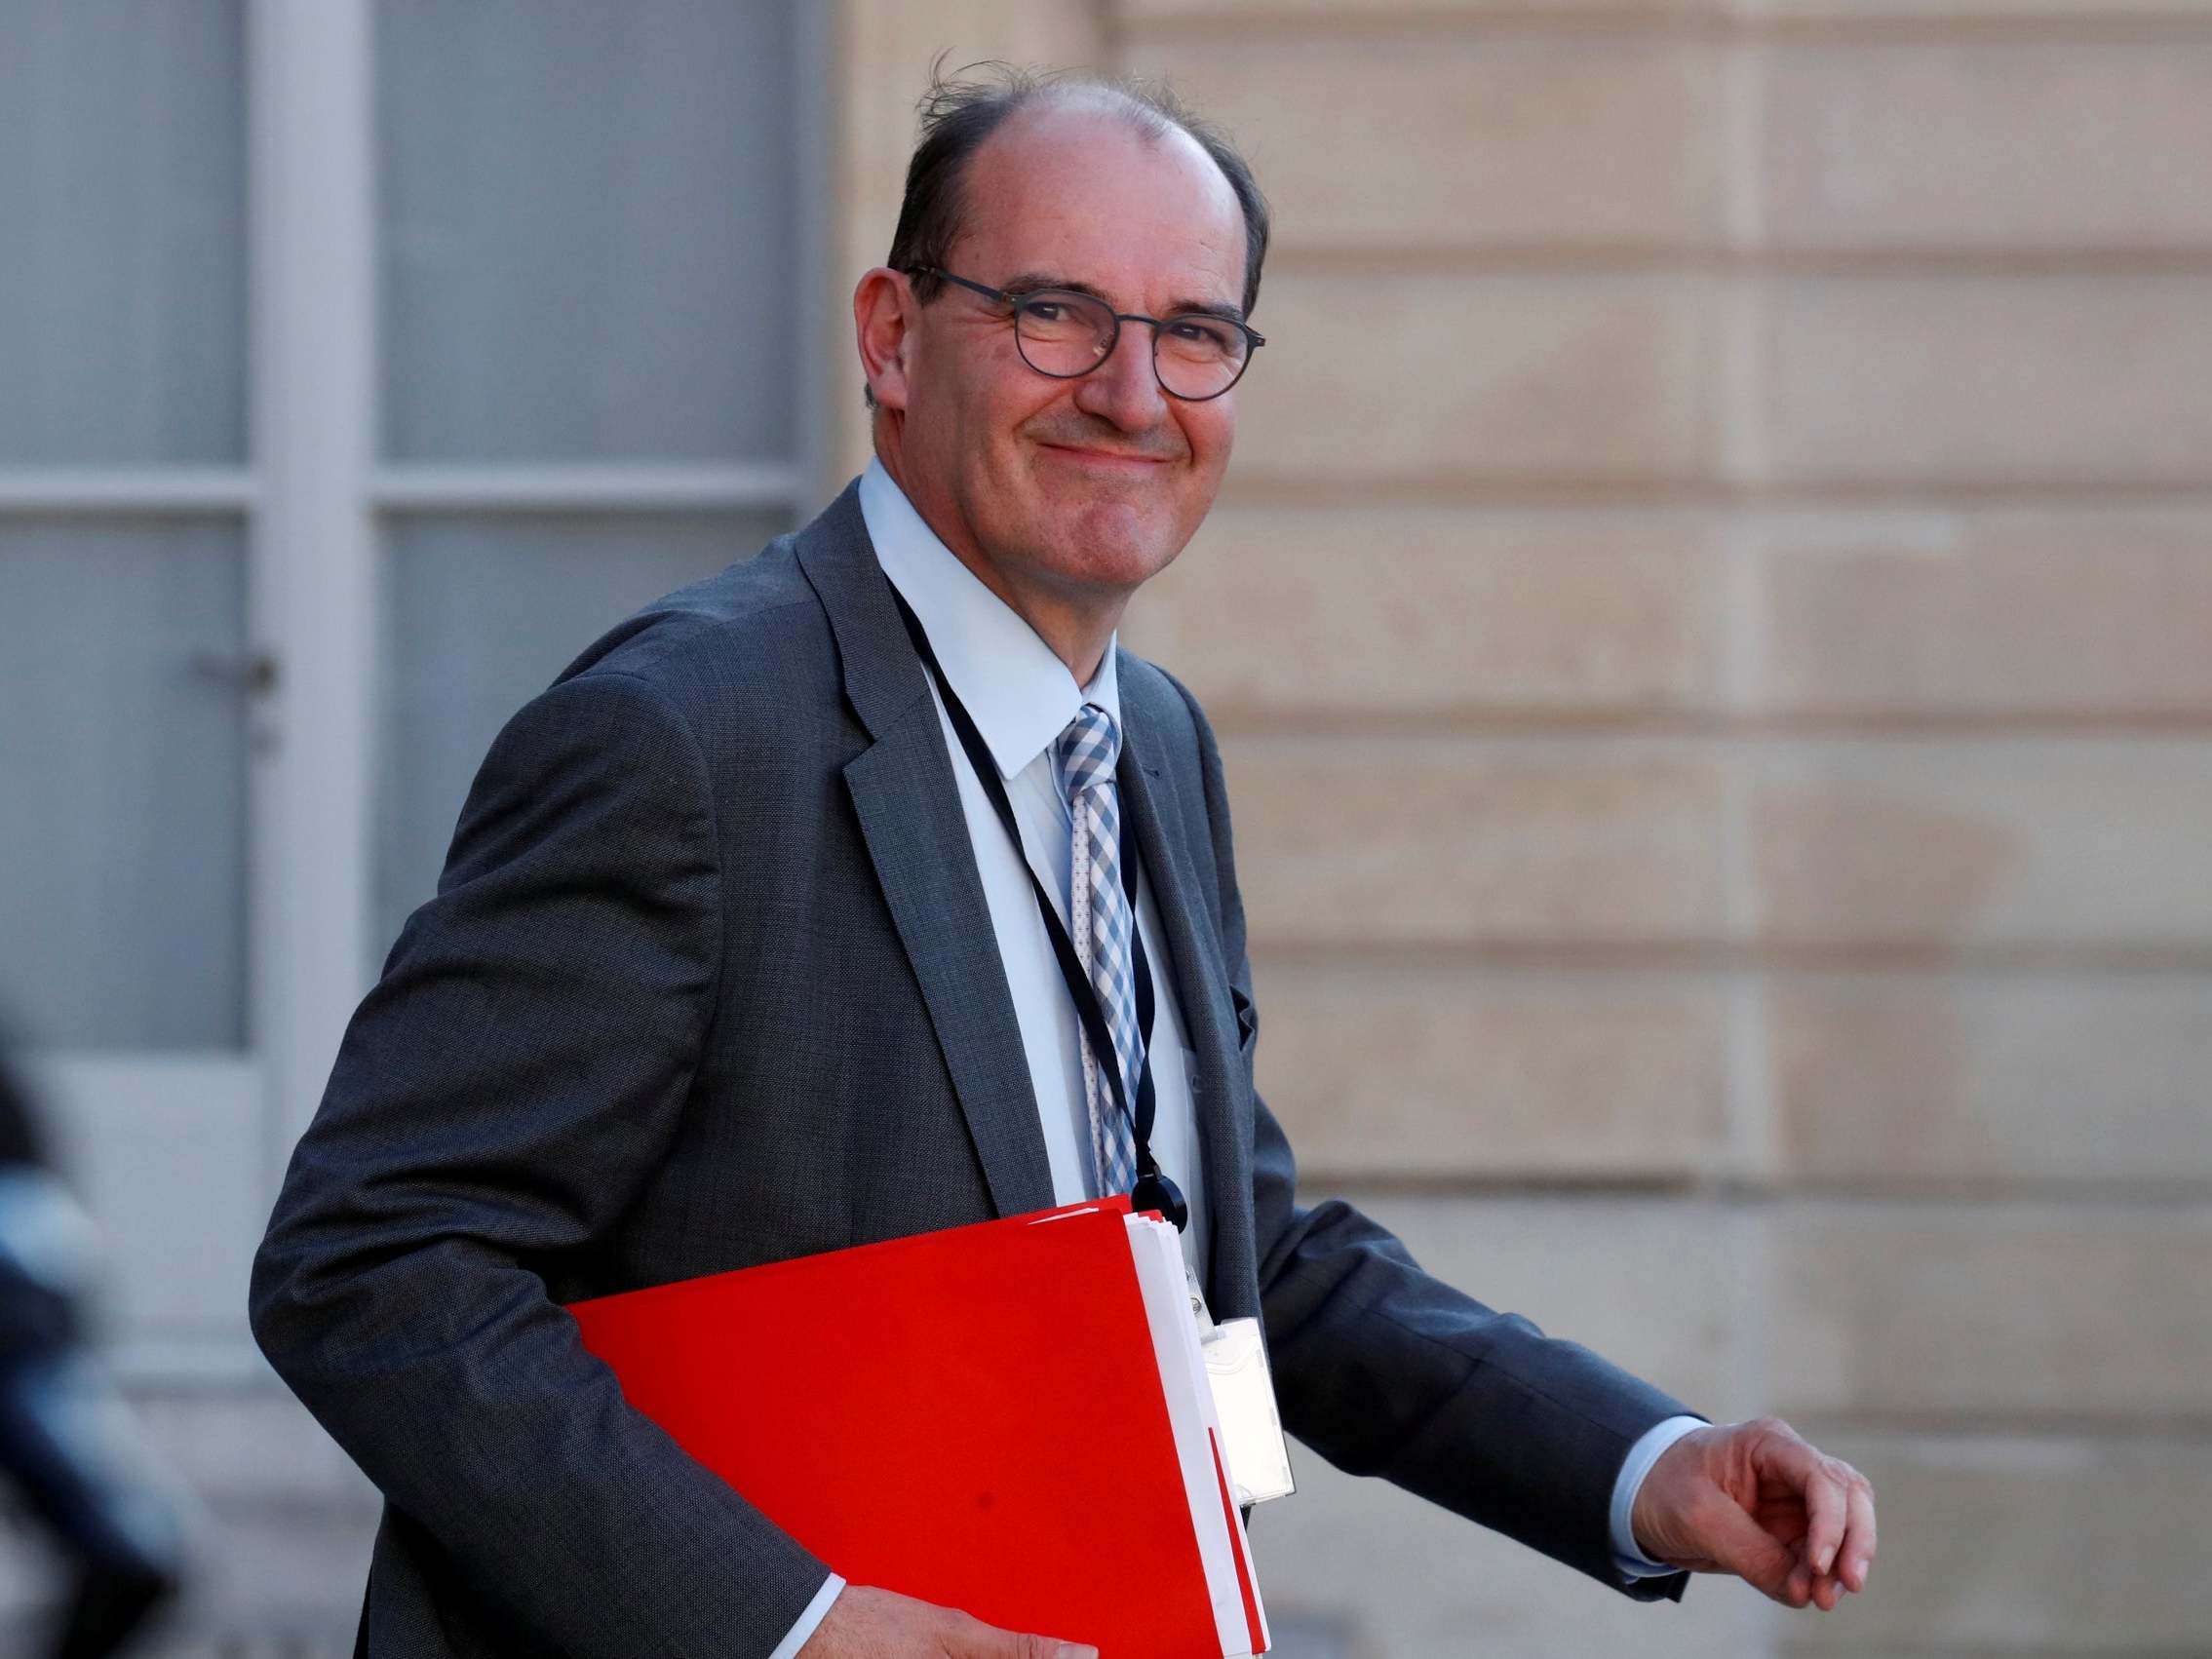 French government "deconfinement" coordinator Jean Castex leaves after a videoconference with the French president and French mayors at the Elysee Palace in Paris